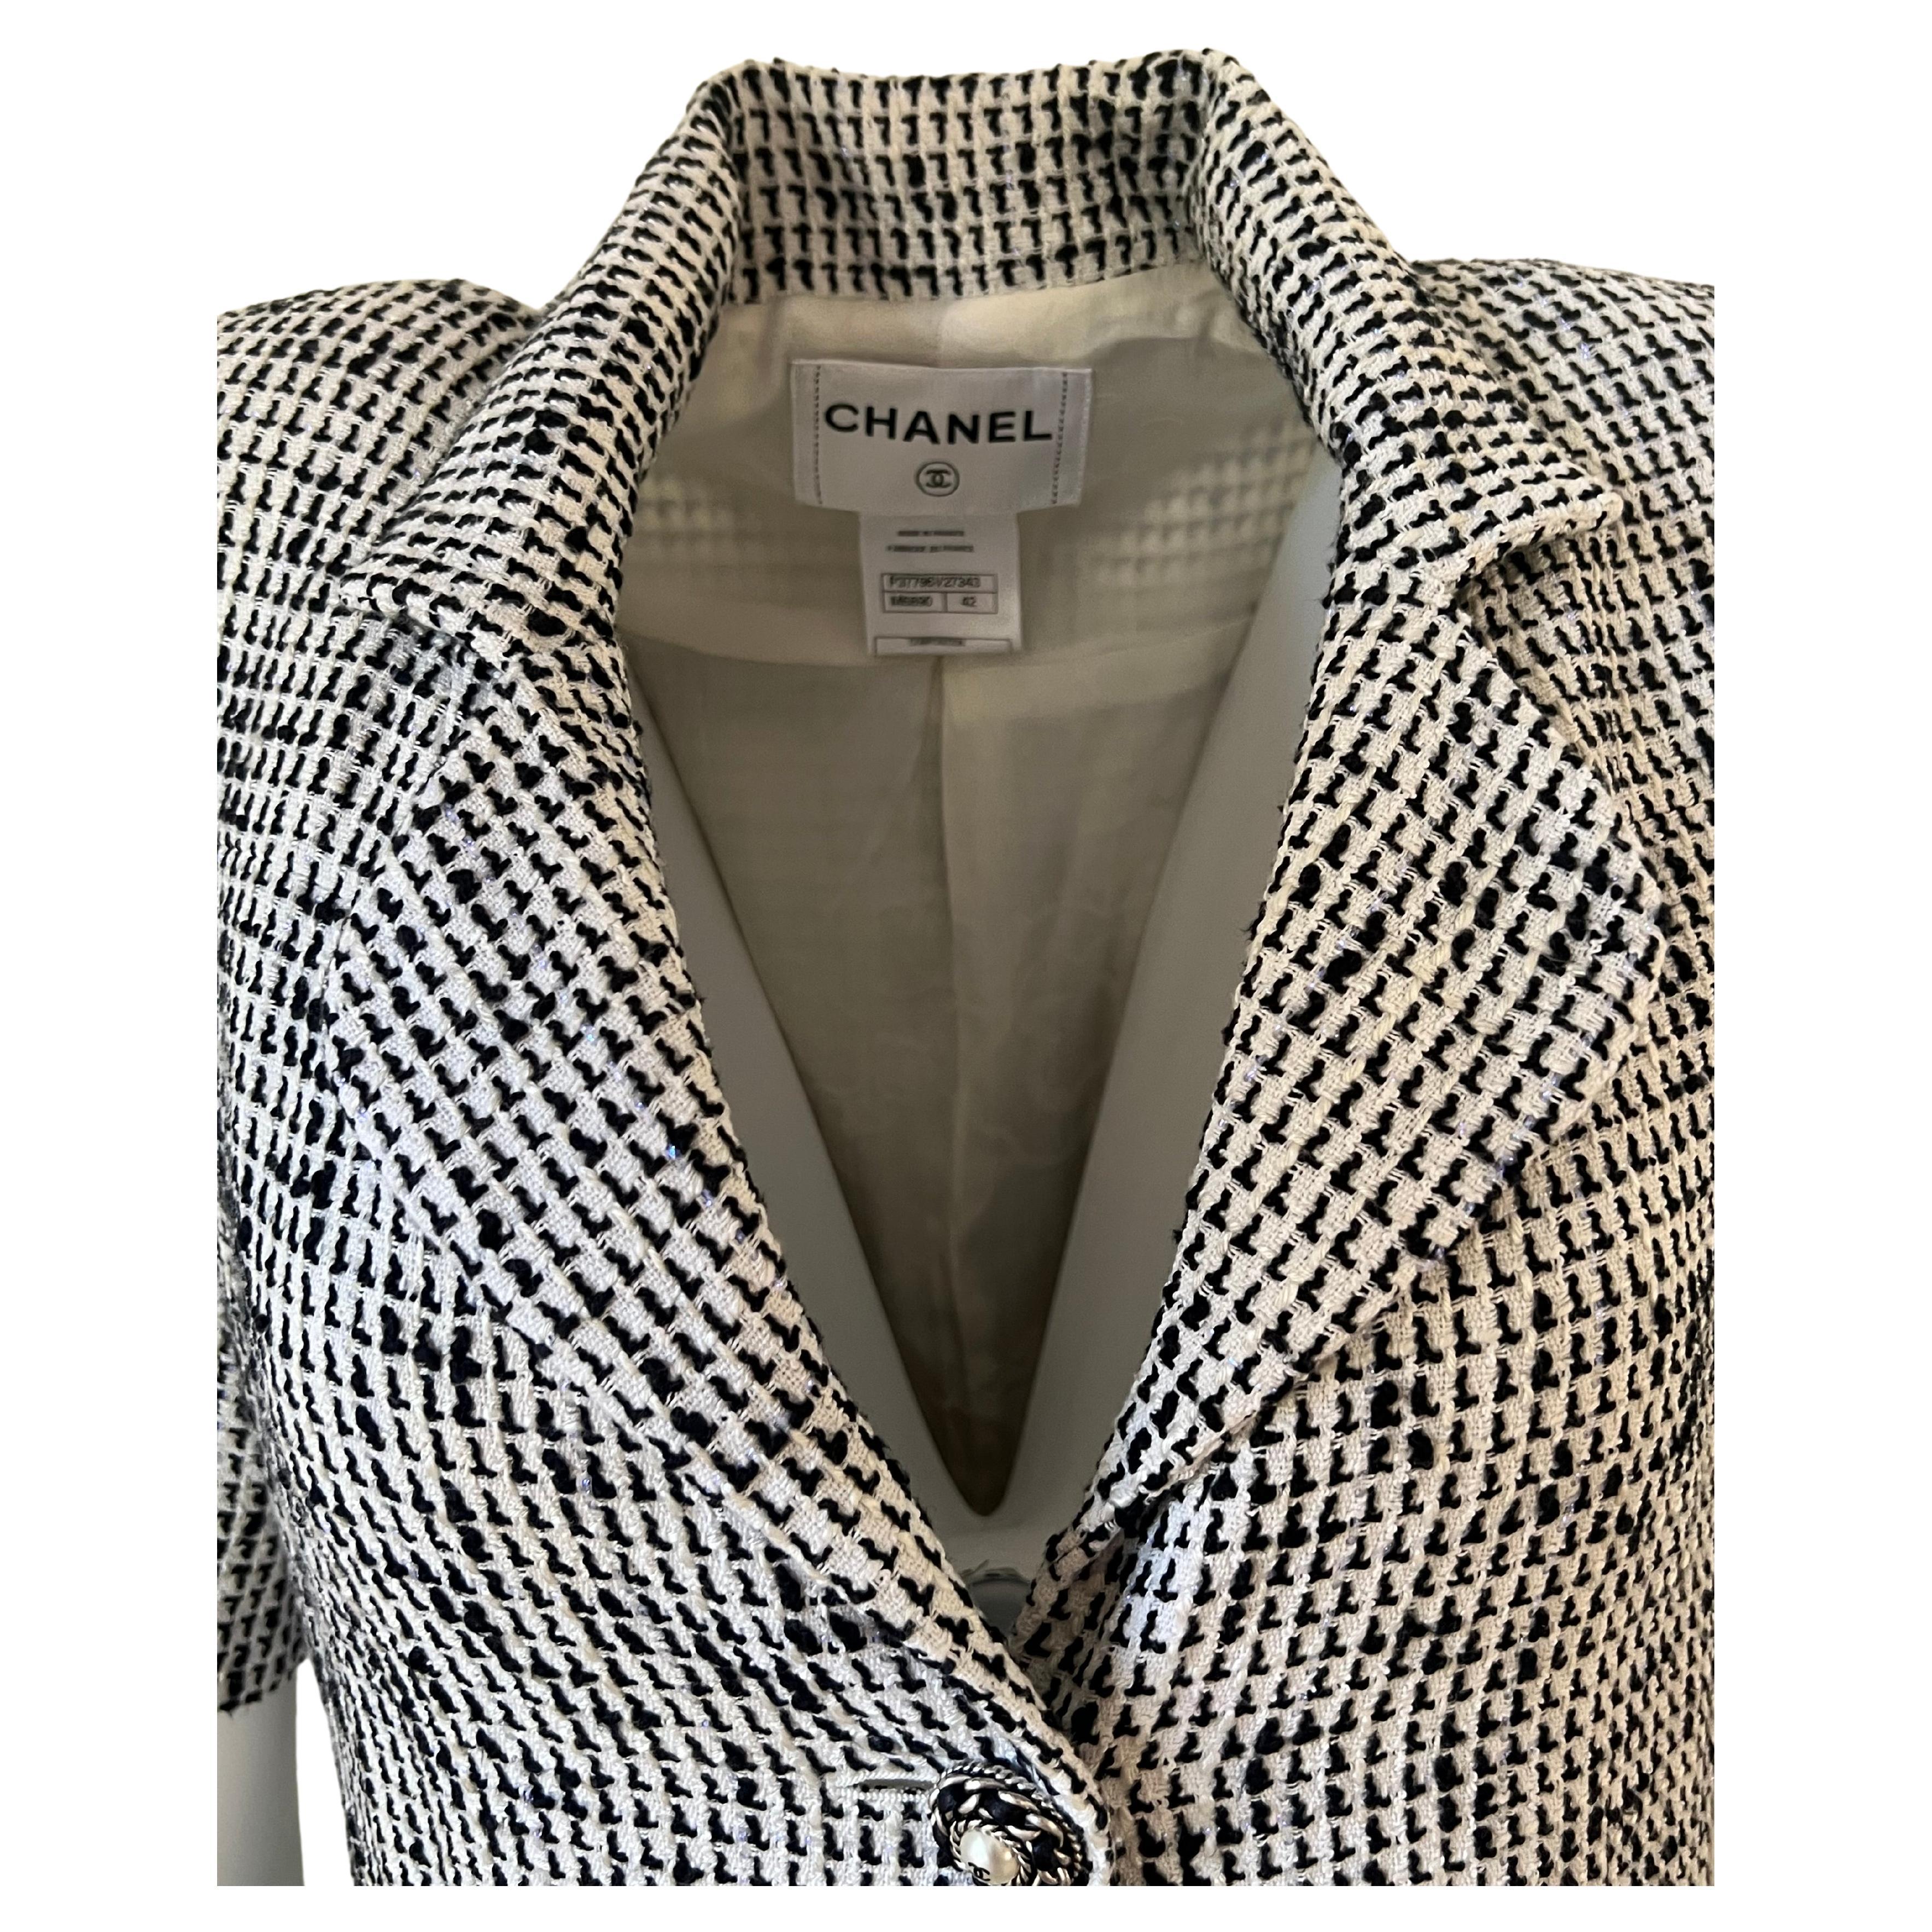 Chanel Dress Coat Black and White Tweed 2010 For Sale 4